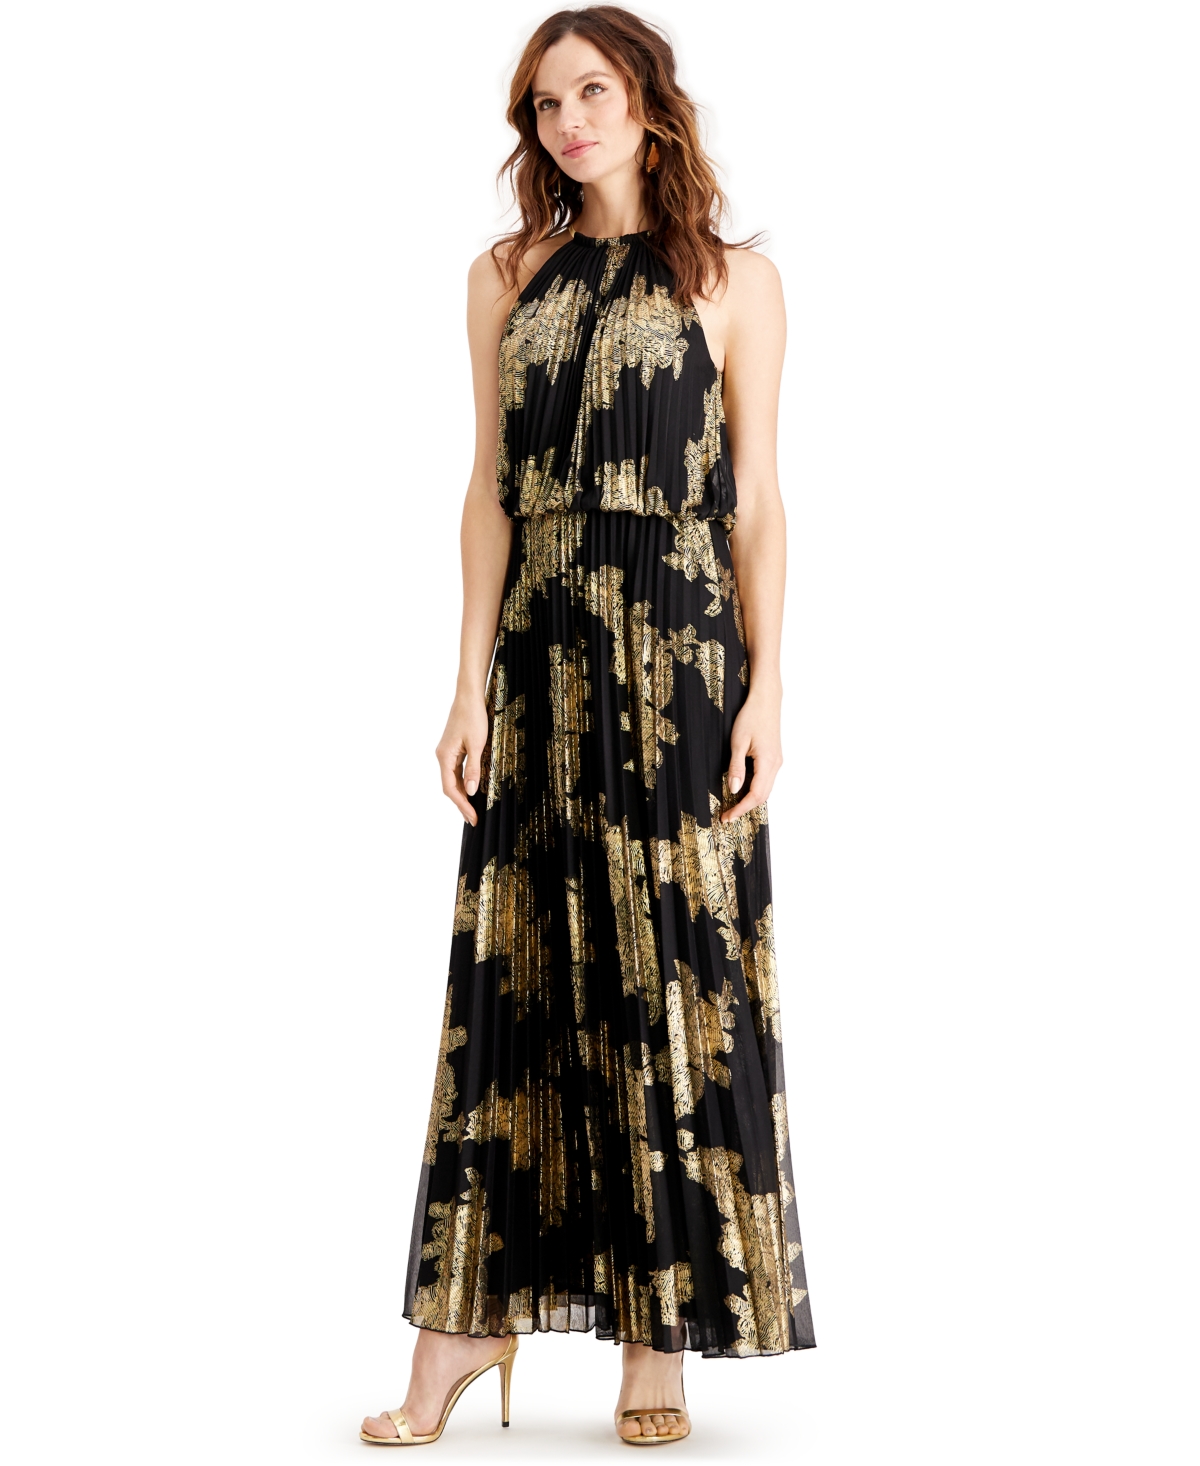 Petite Pleated Gold-Print Gown - Black/Gold